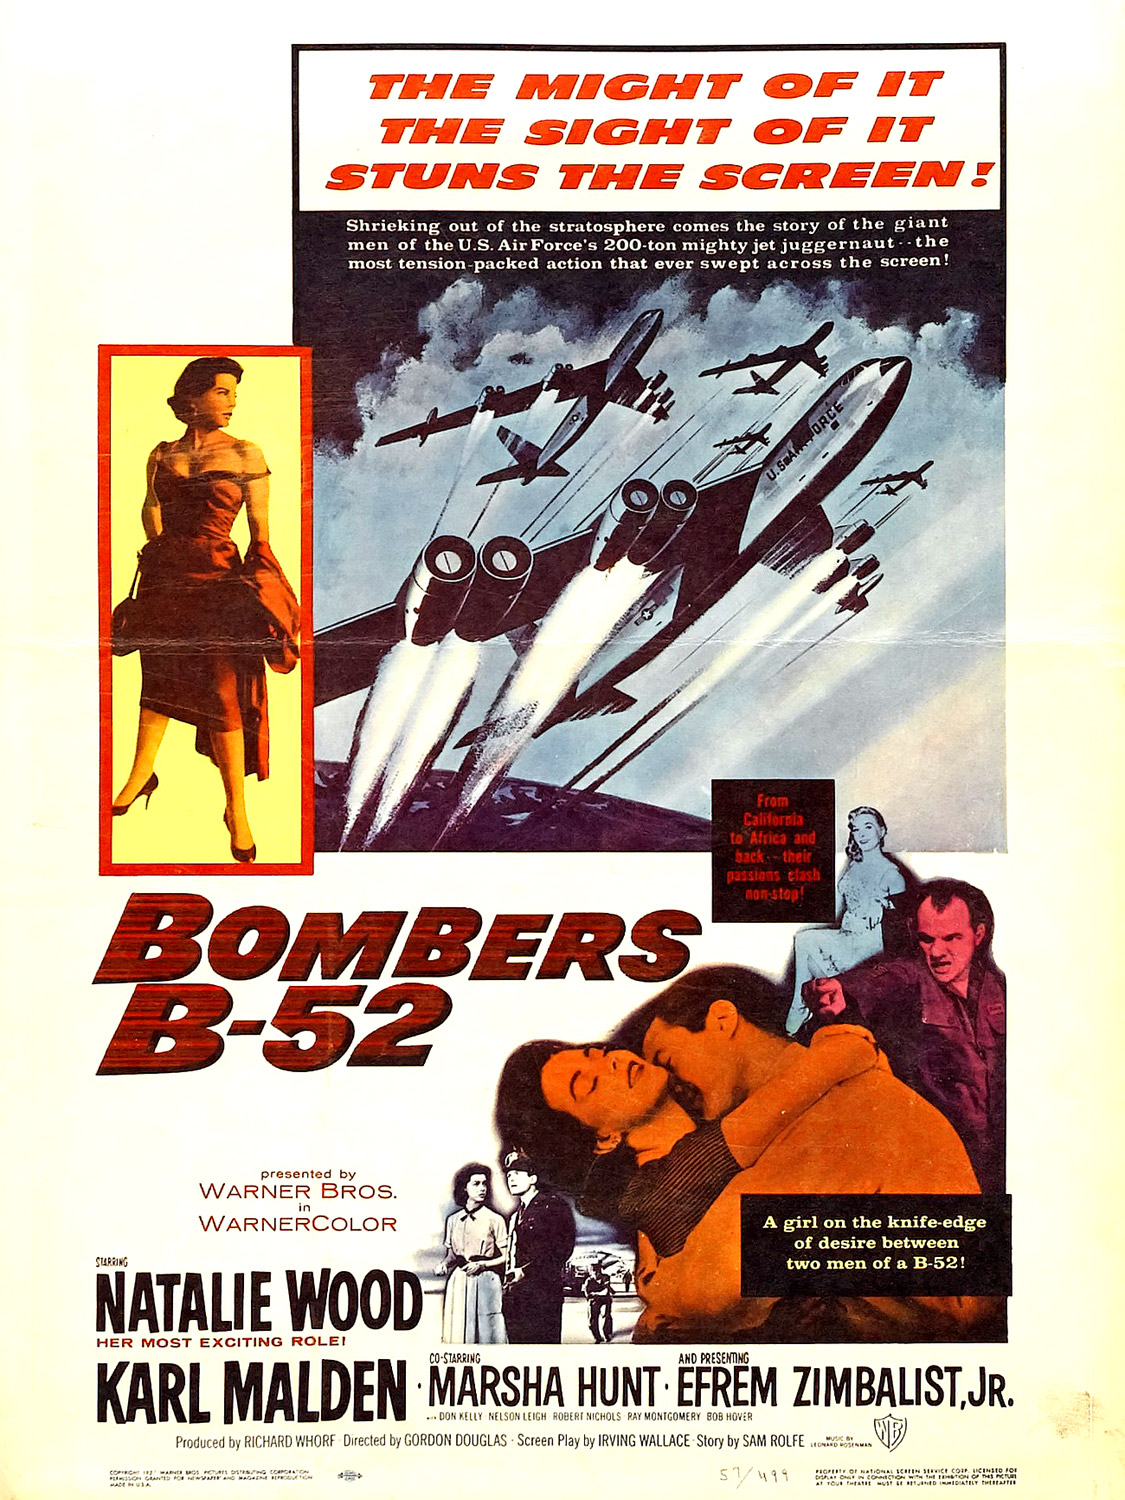 Poster for the 1957 motion picture, "Bombers B-52".